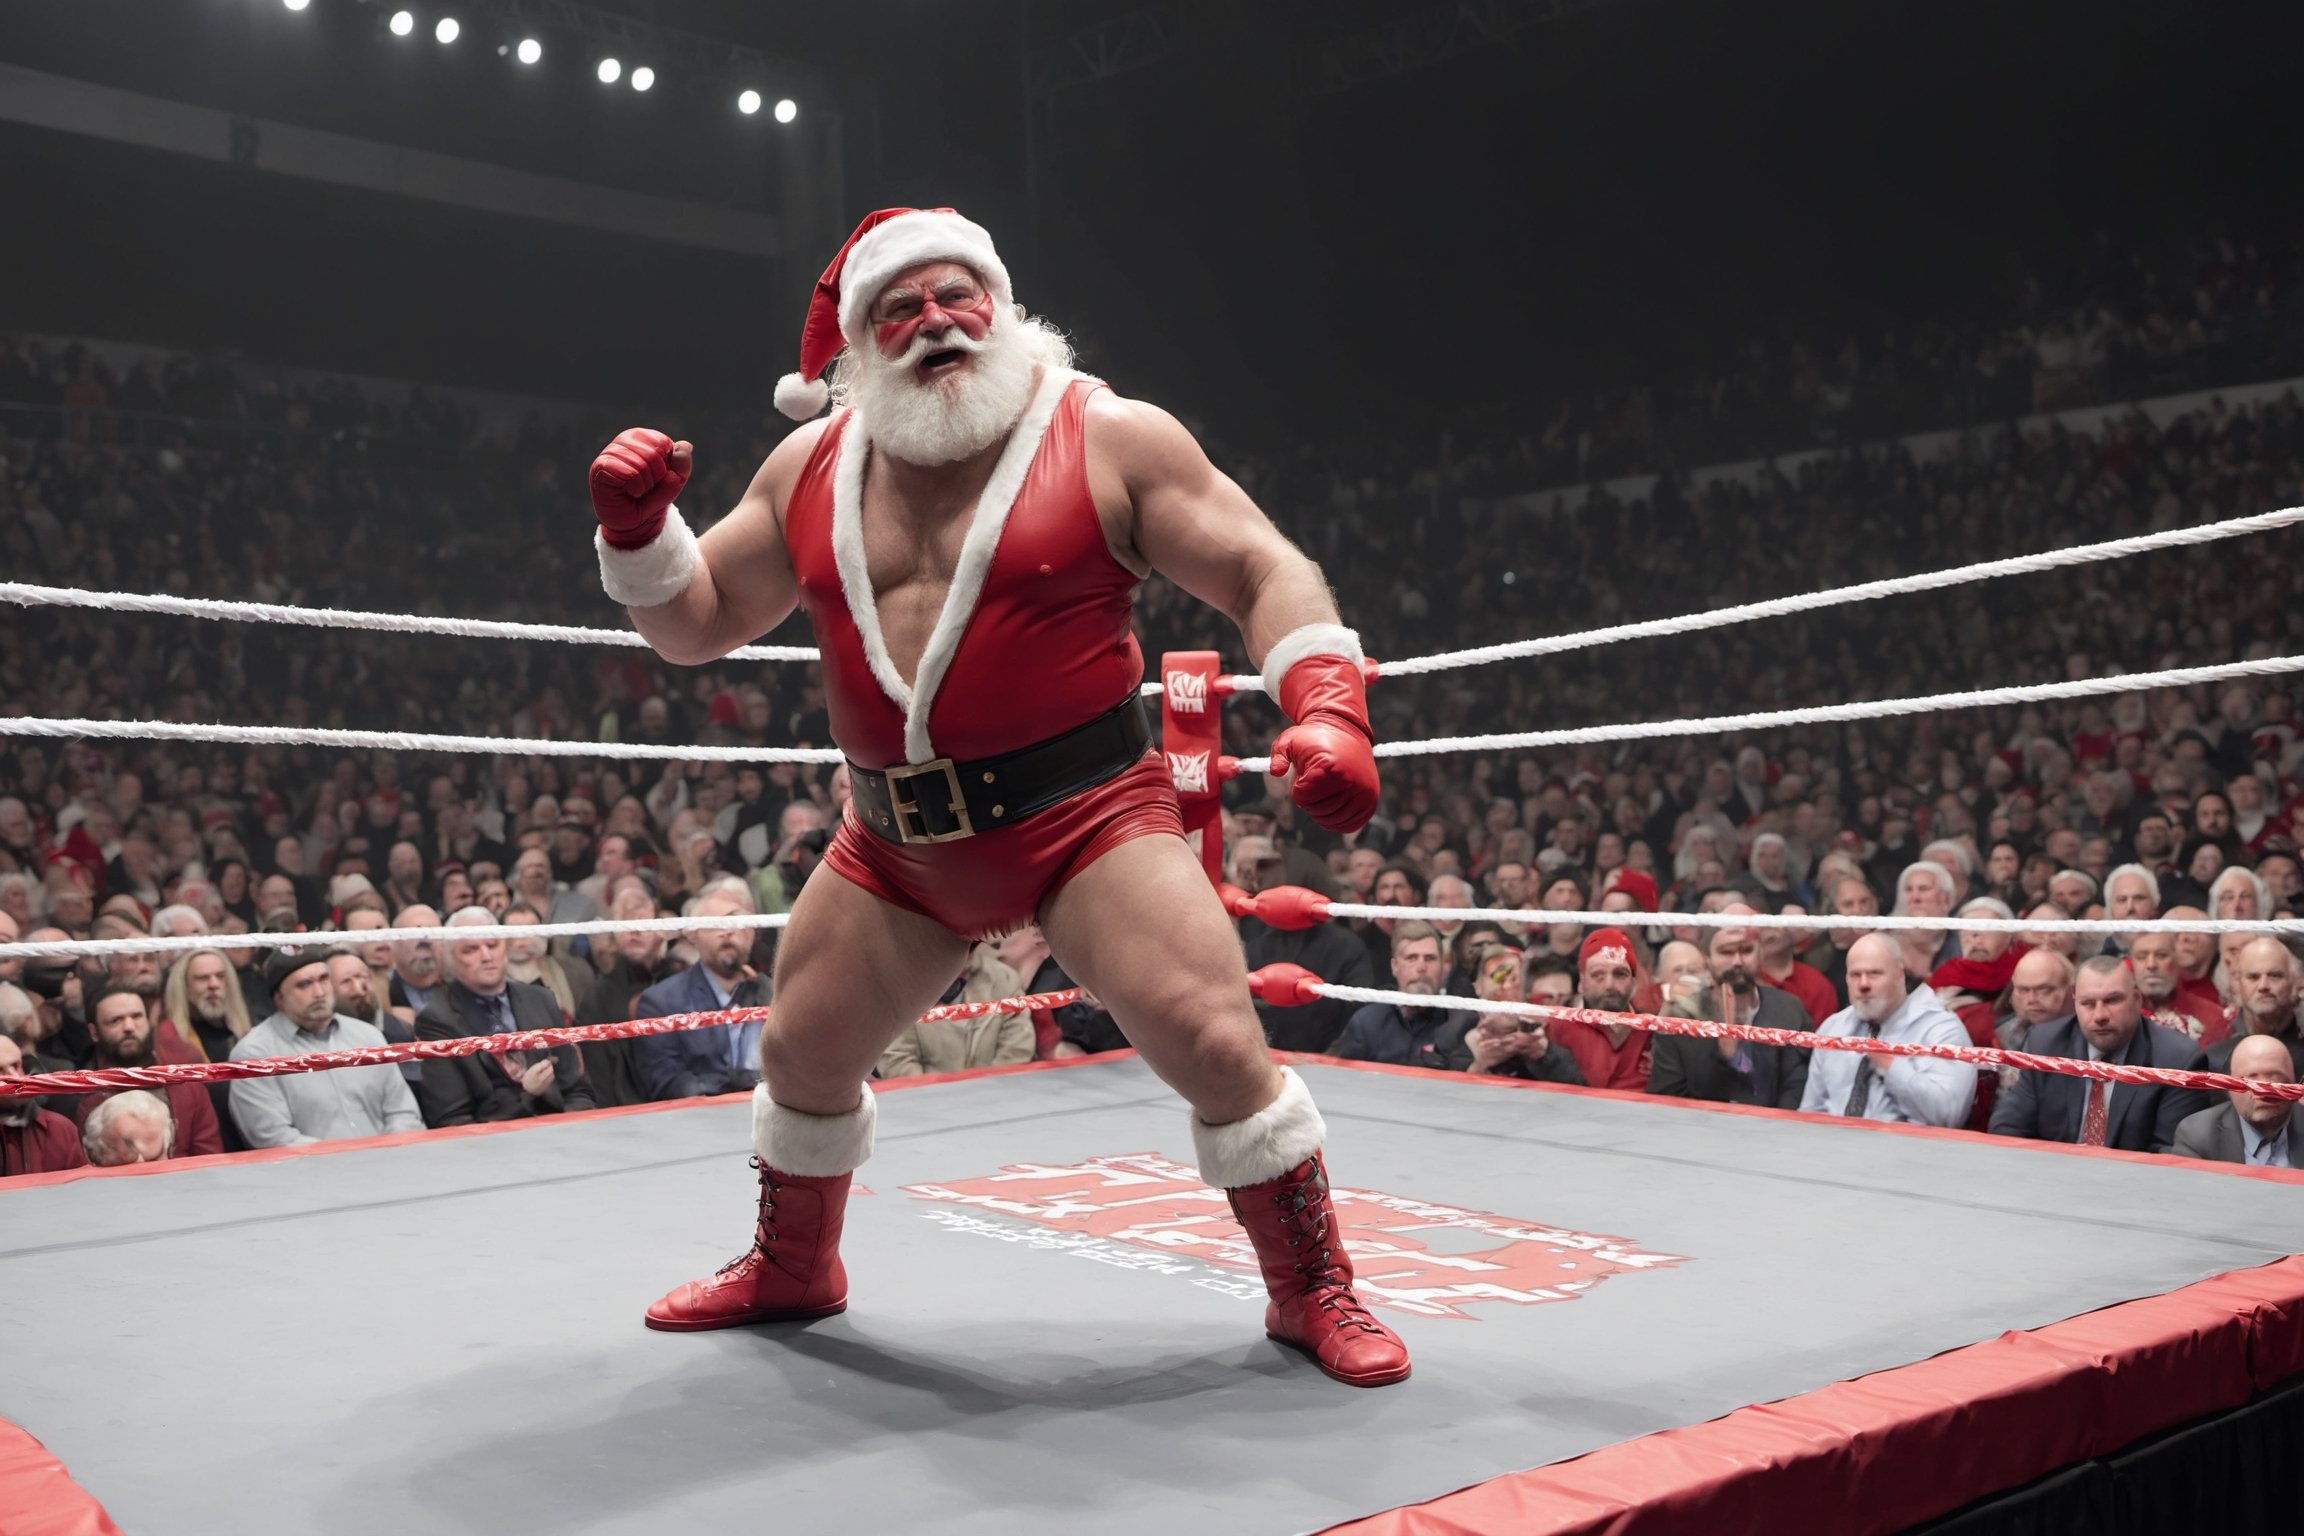  Santa Claus stepping into the wrestling ring, ready to throw down in a festive, high-energy match,Dressed in a uniquely designed wrestling costume, Santa exudes strength and charisma as he faces off against an equally enthusiastic opponent. The crowd cheers in anticipation, witnessing the epic collision of holiday cheer and powerful wrestling moves in this one-of-a-kind Christmas showdown,Sign with ECW written on it,